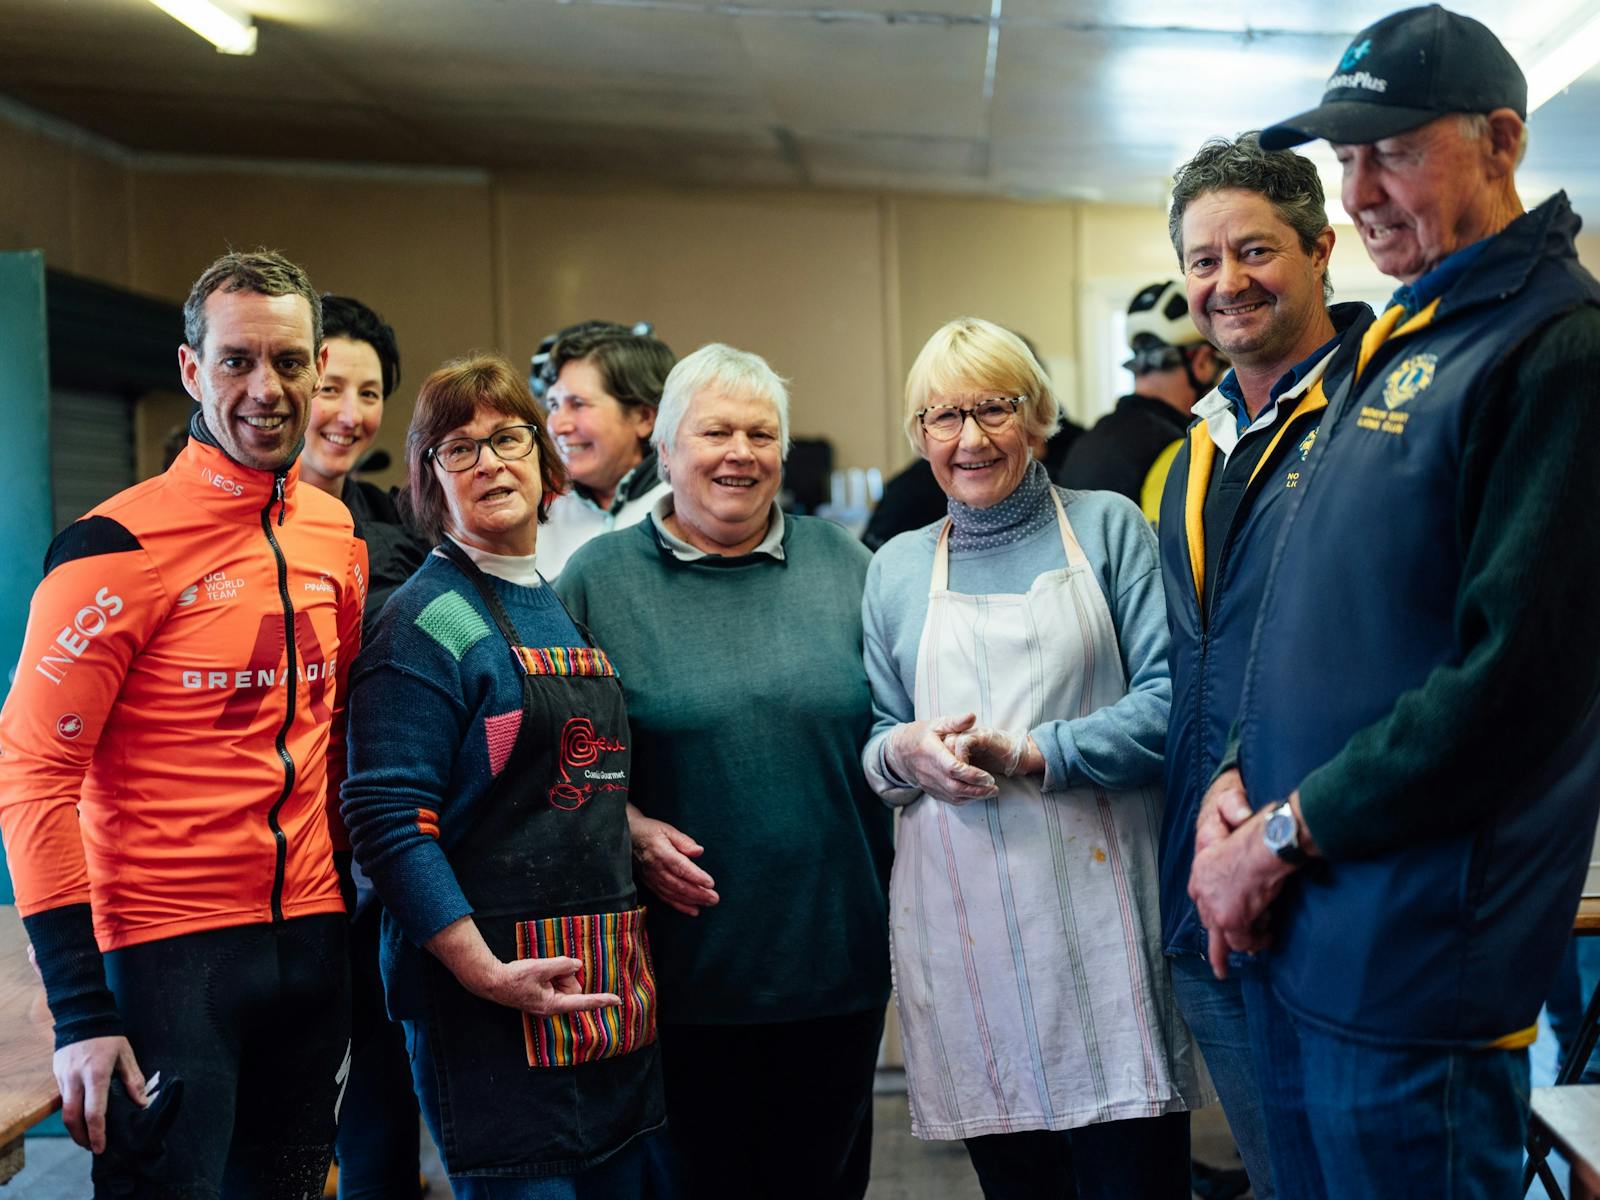 Richie Porte and the North East Lions Club